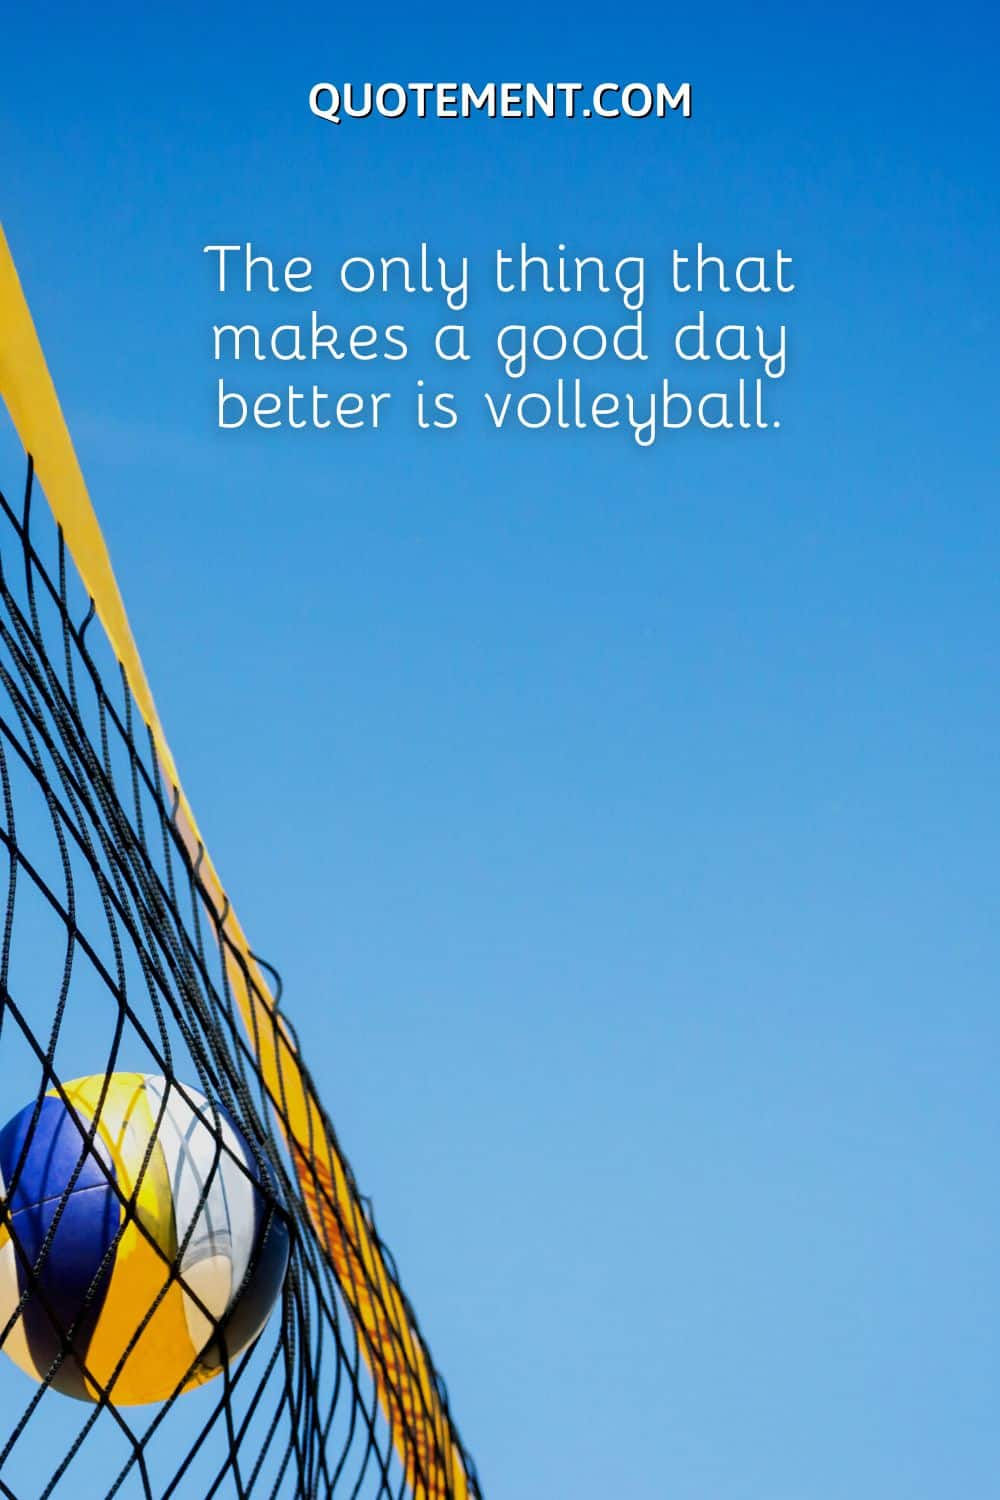 The only thing that makes a good day better is volleyball.